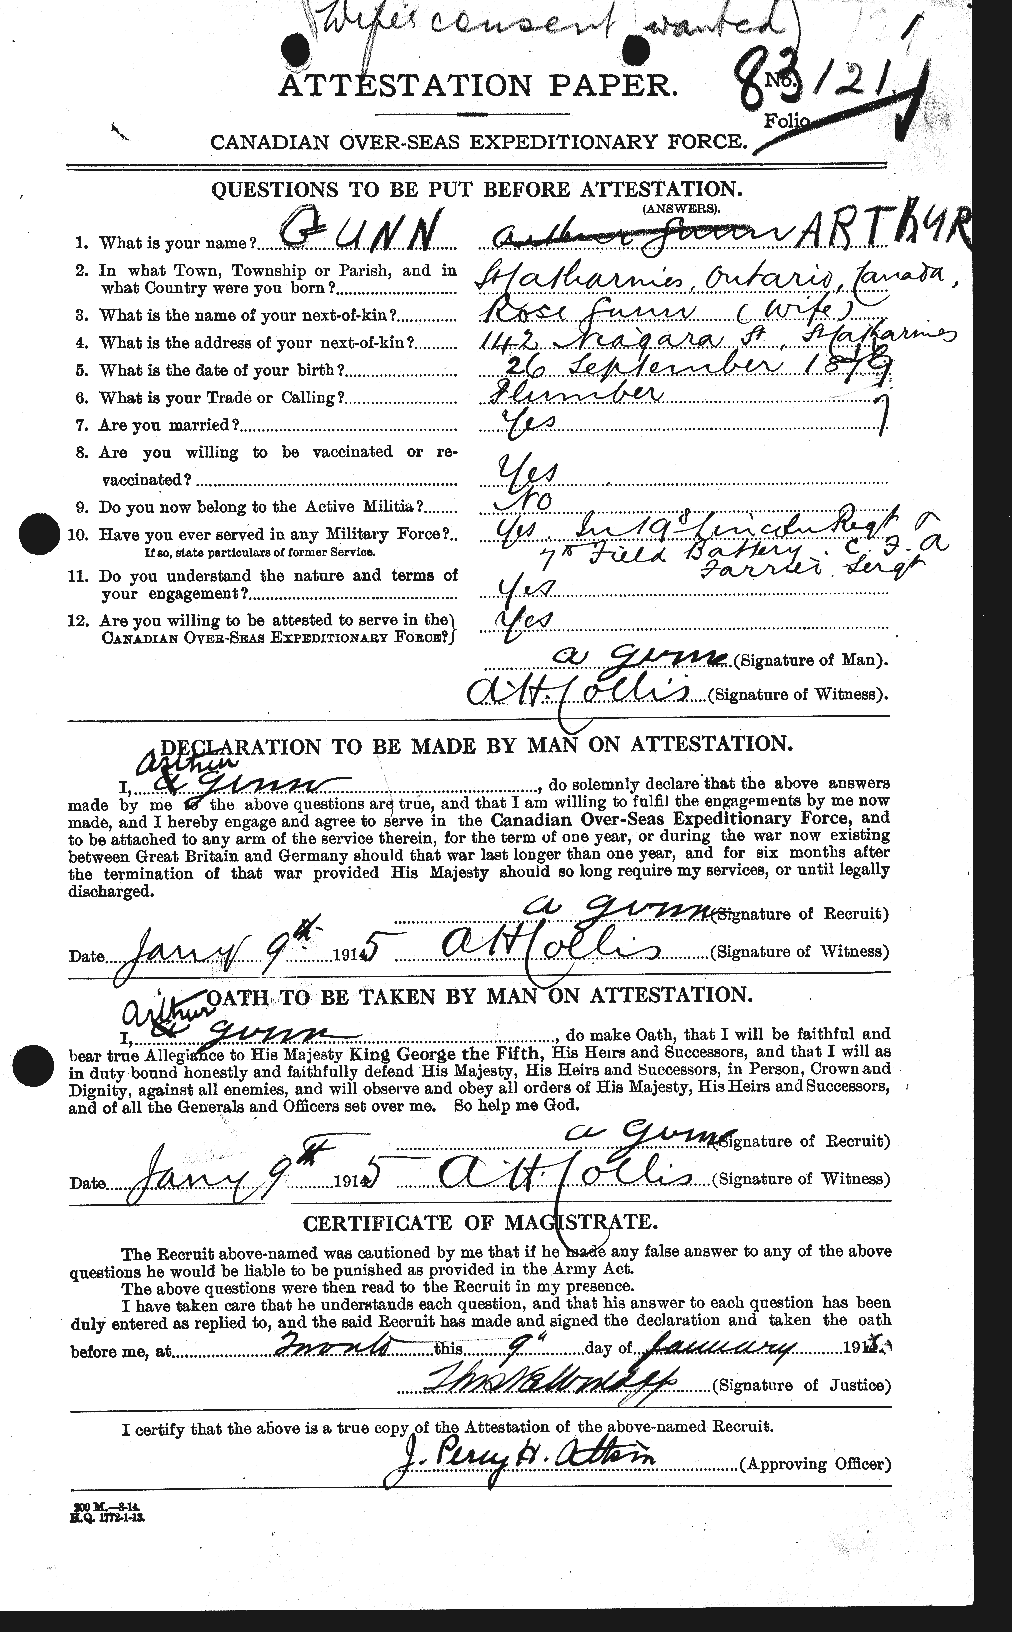 Personnel Records of the First World War - CEF 368001a